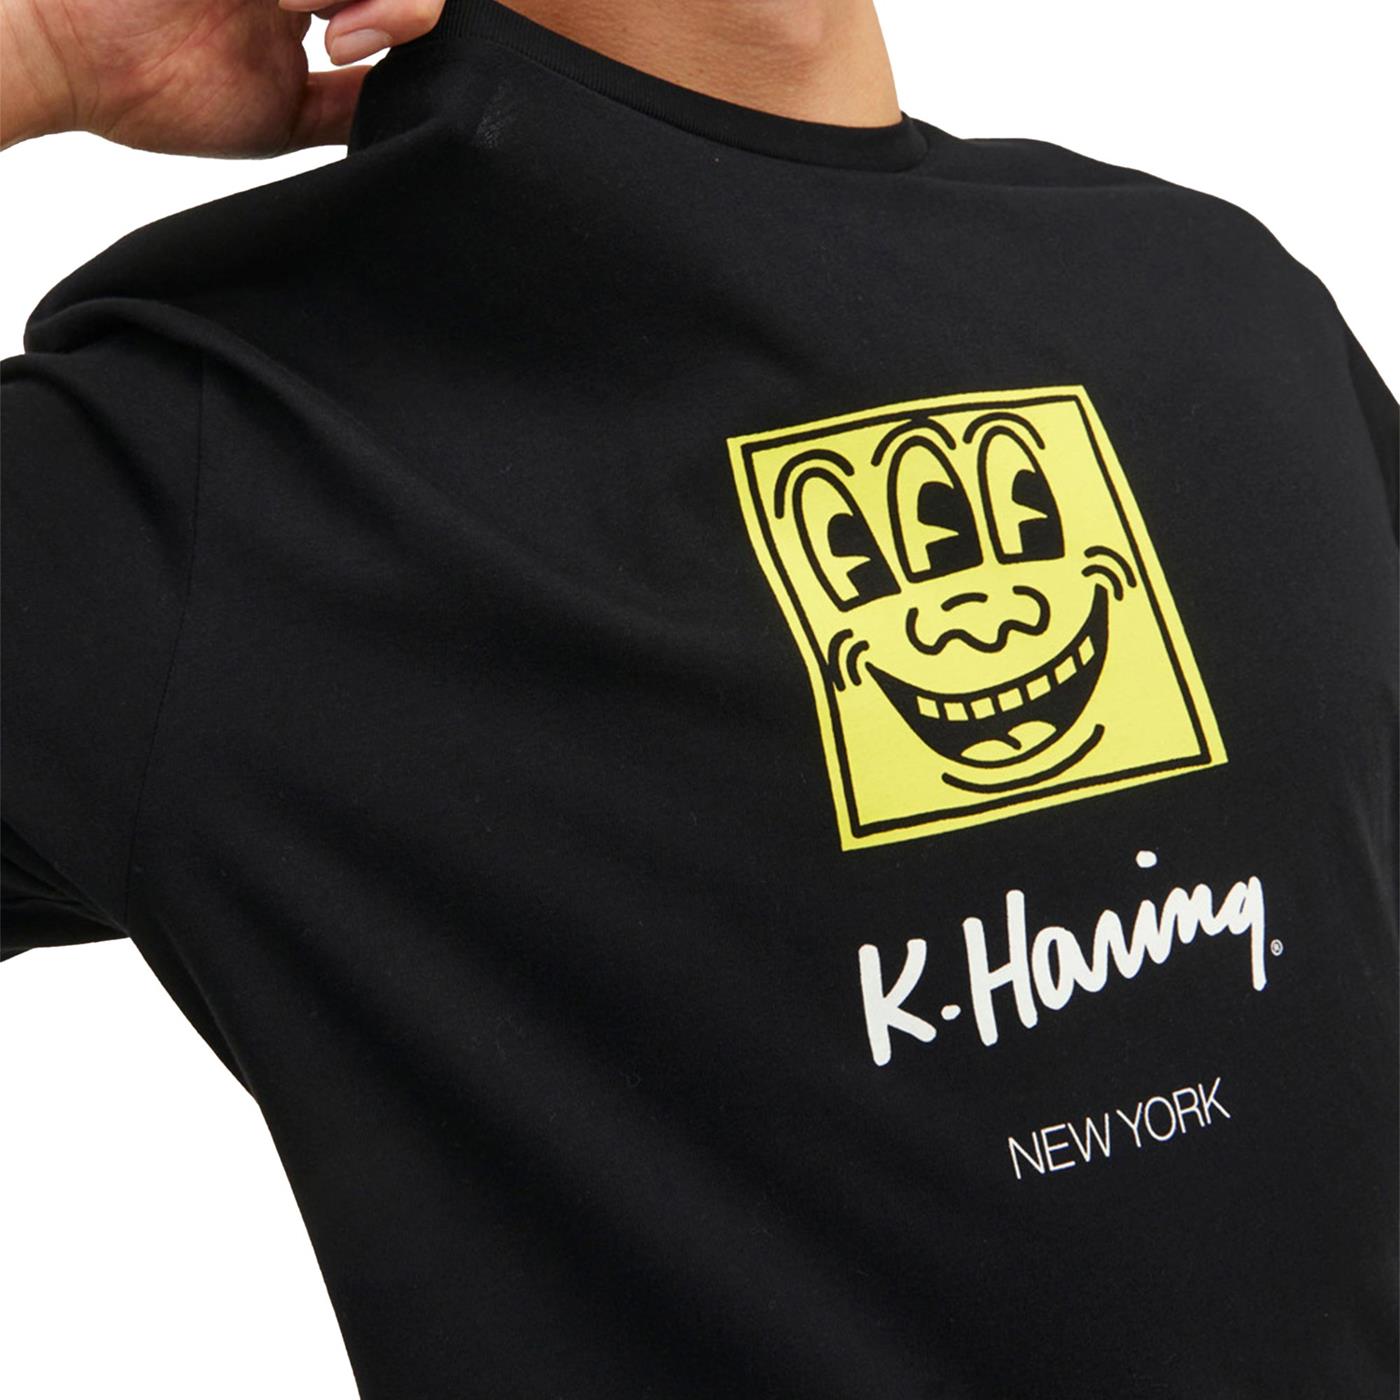 Keith Haring Front Tee SS Crew Neck